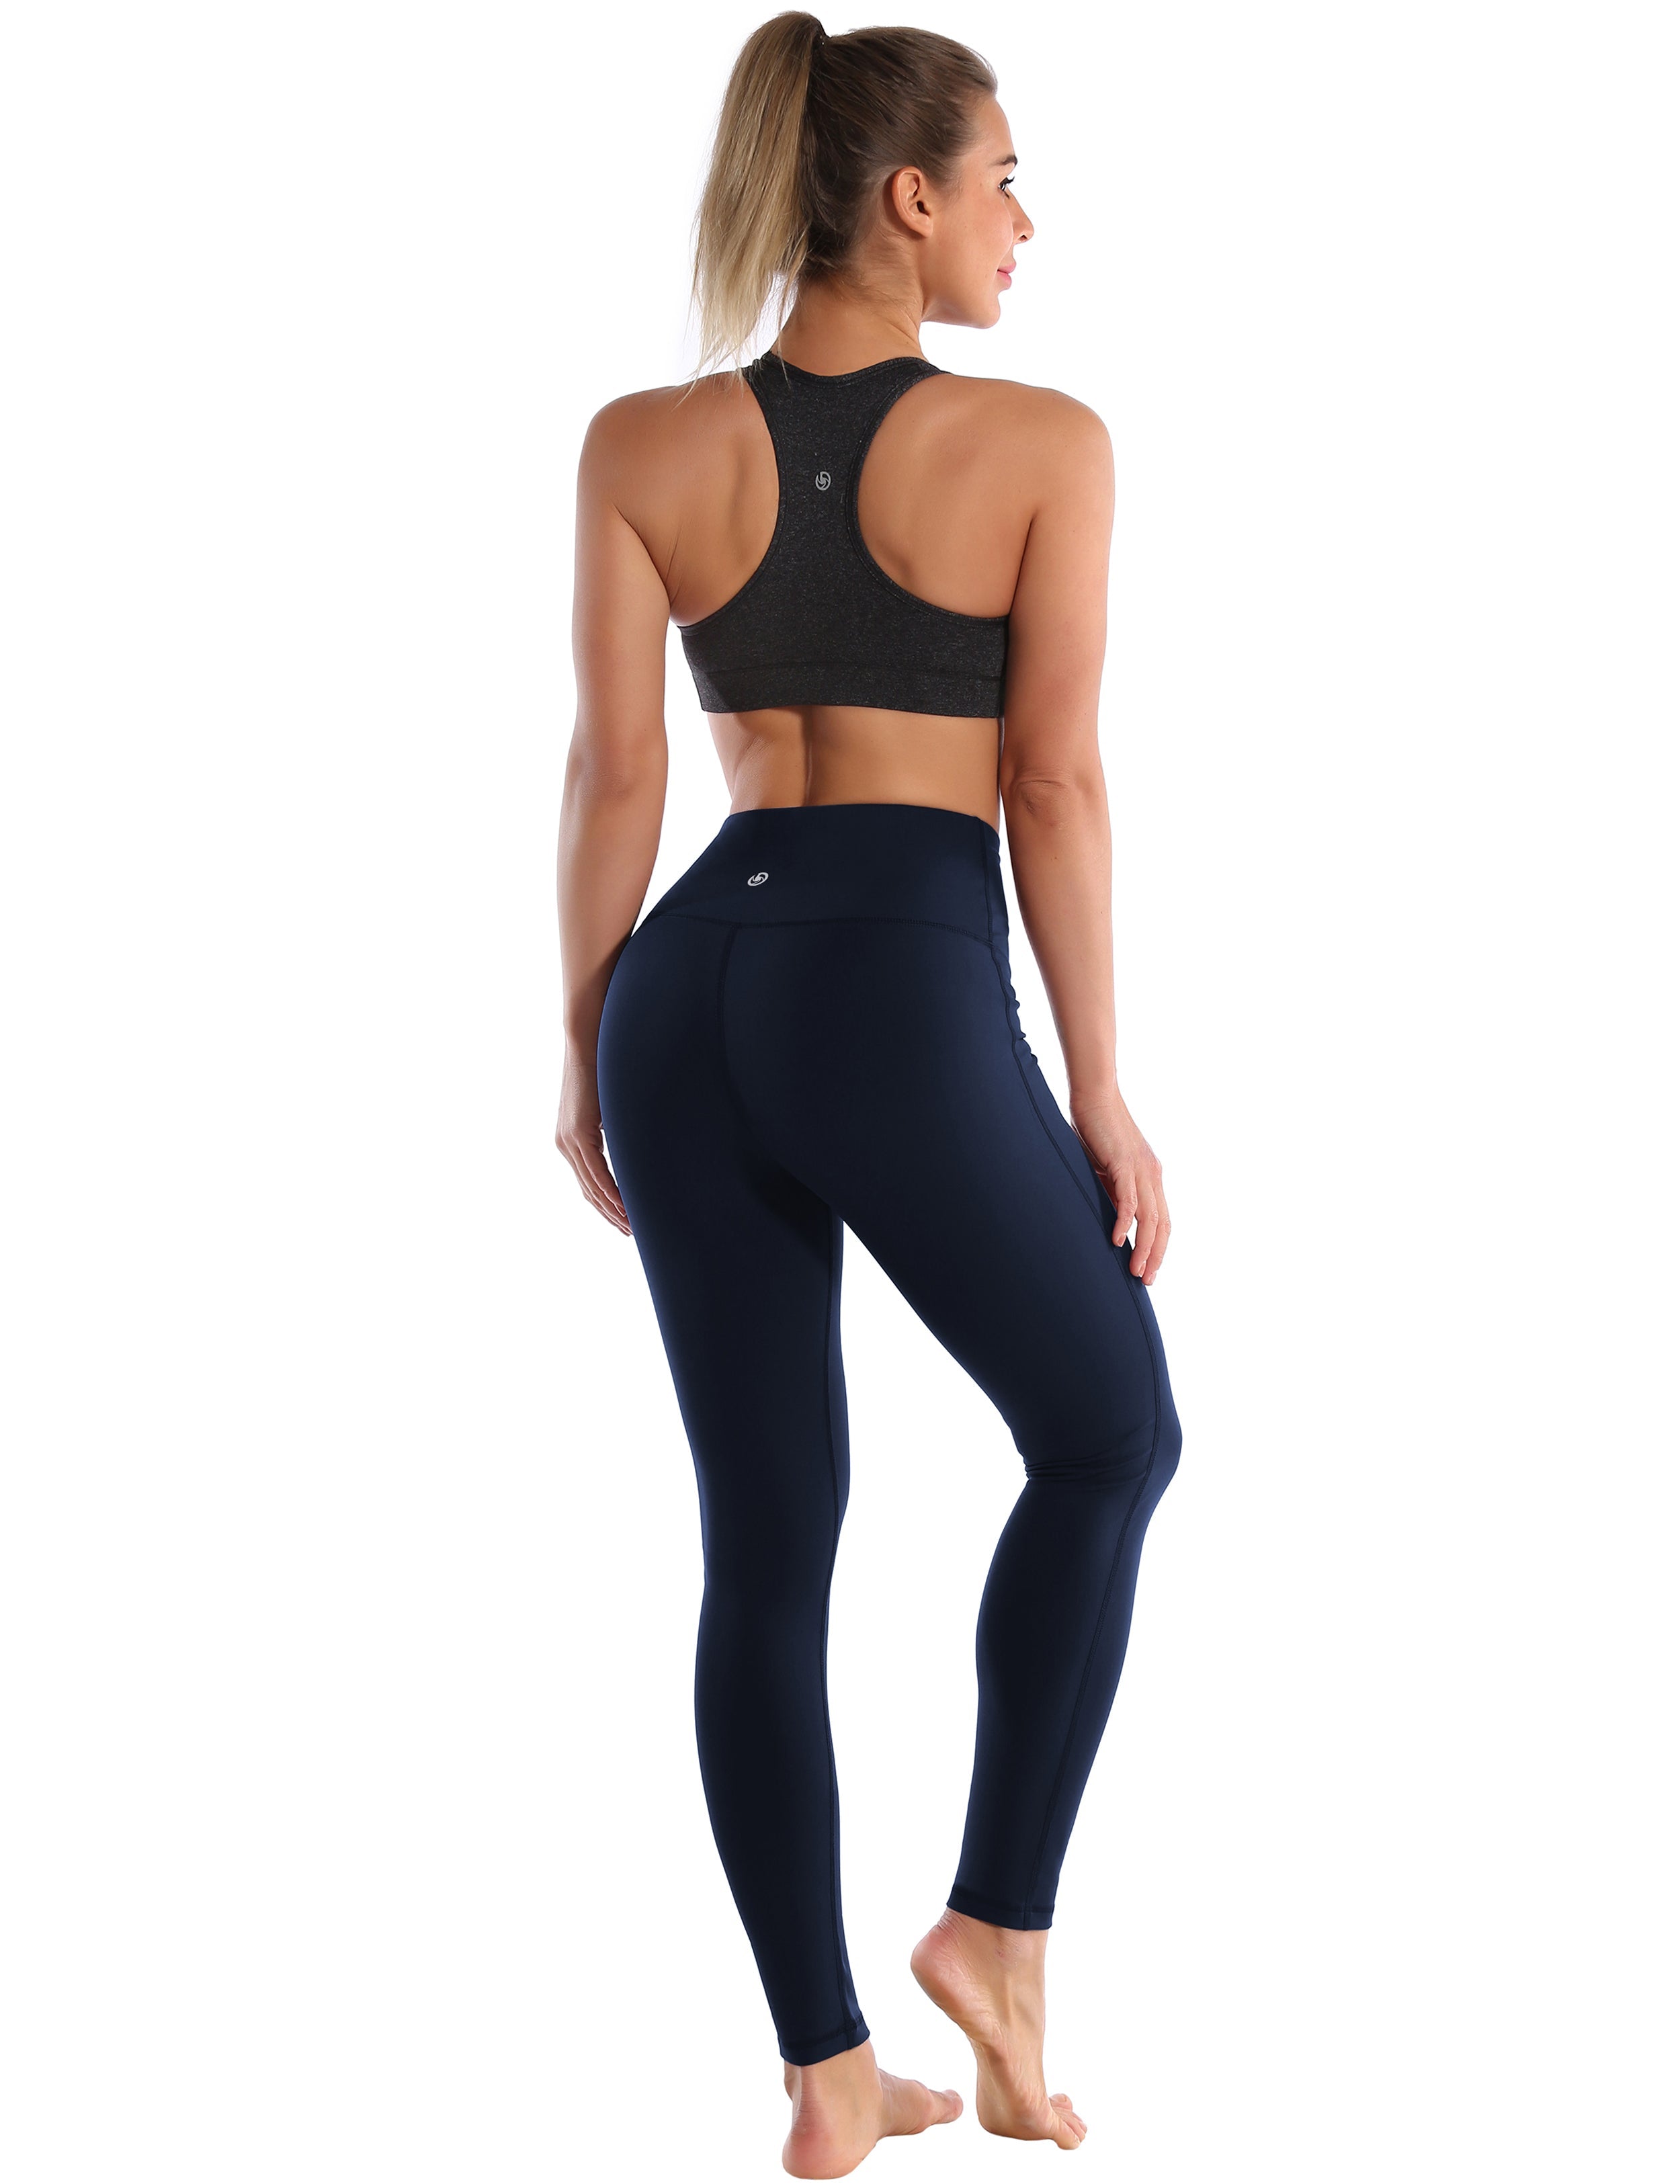 High Waist Side Line Pilates Pants darknavy Side Line is Make Your Legs Look Longer and Thinner 75%Nylon/25%Spandex Fabric doesn't attract lint easily 4-way stretch No see-through Moisture-wicking Tummy control Inner pocket Two lengths